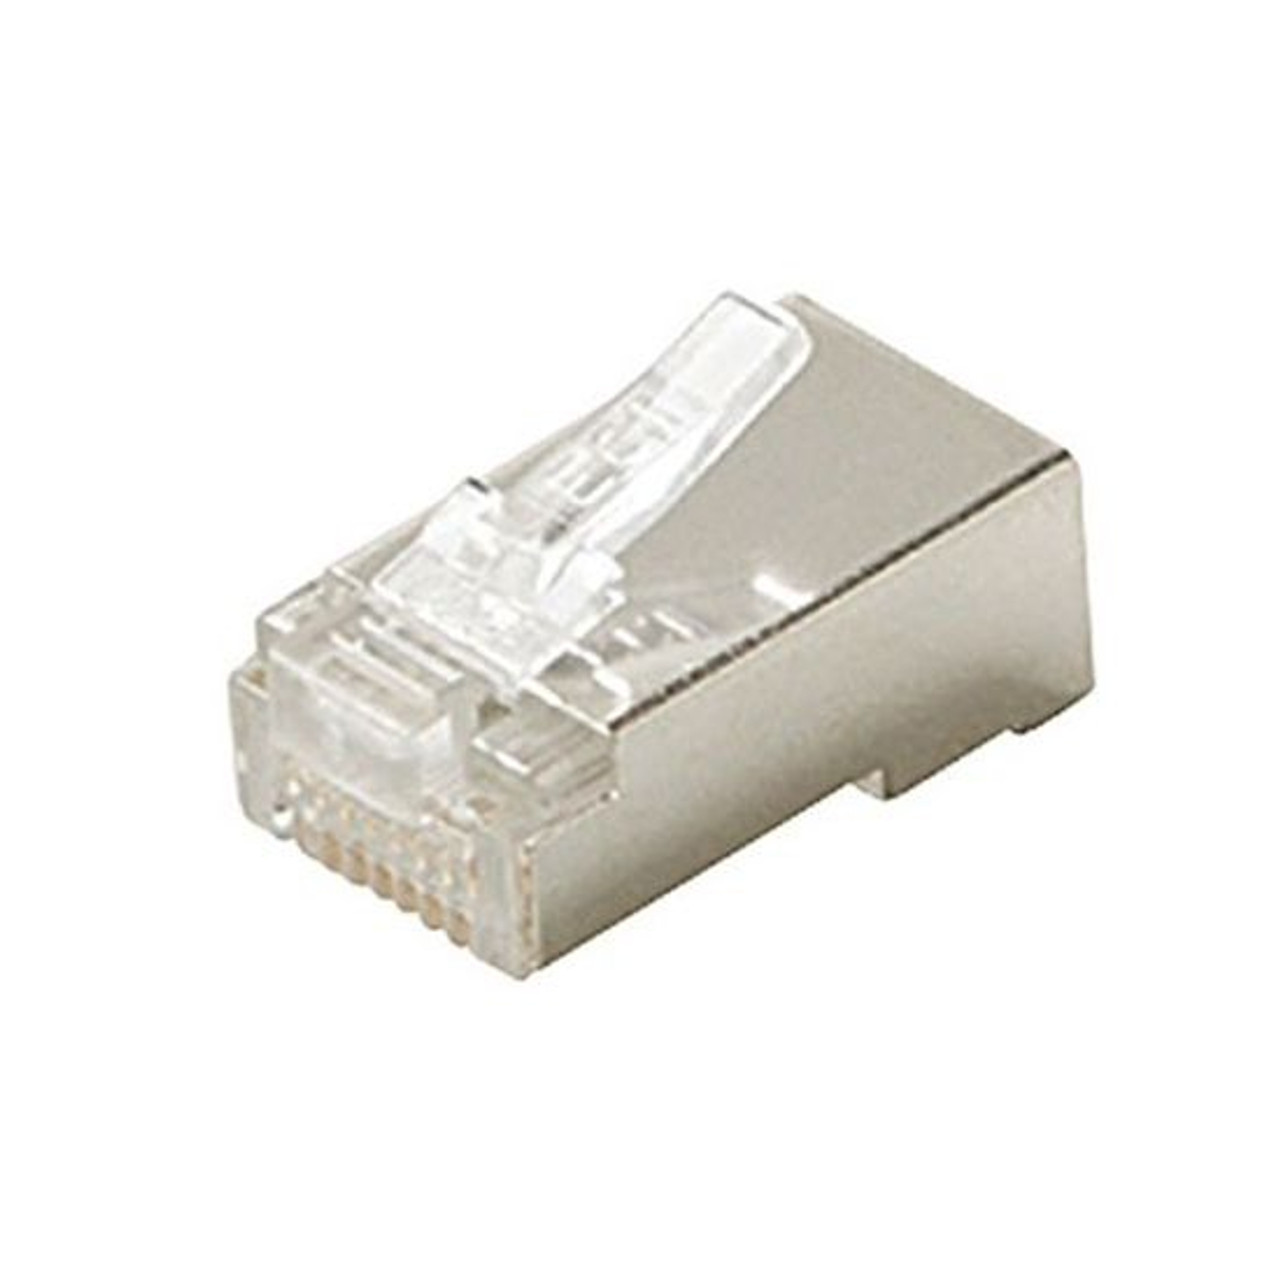 Steren 301-182 CAT5e Plug Modular Connector RJ45 Shielded Stranded Wire 8P8C 24-28 AWG UL Plug 8P8C 1 Pack Connector 8 Pin Male Network Data Telephone Line RJ-45